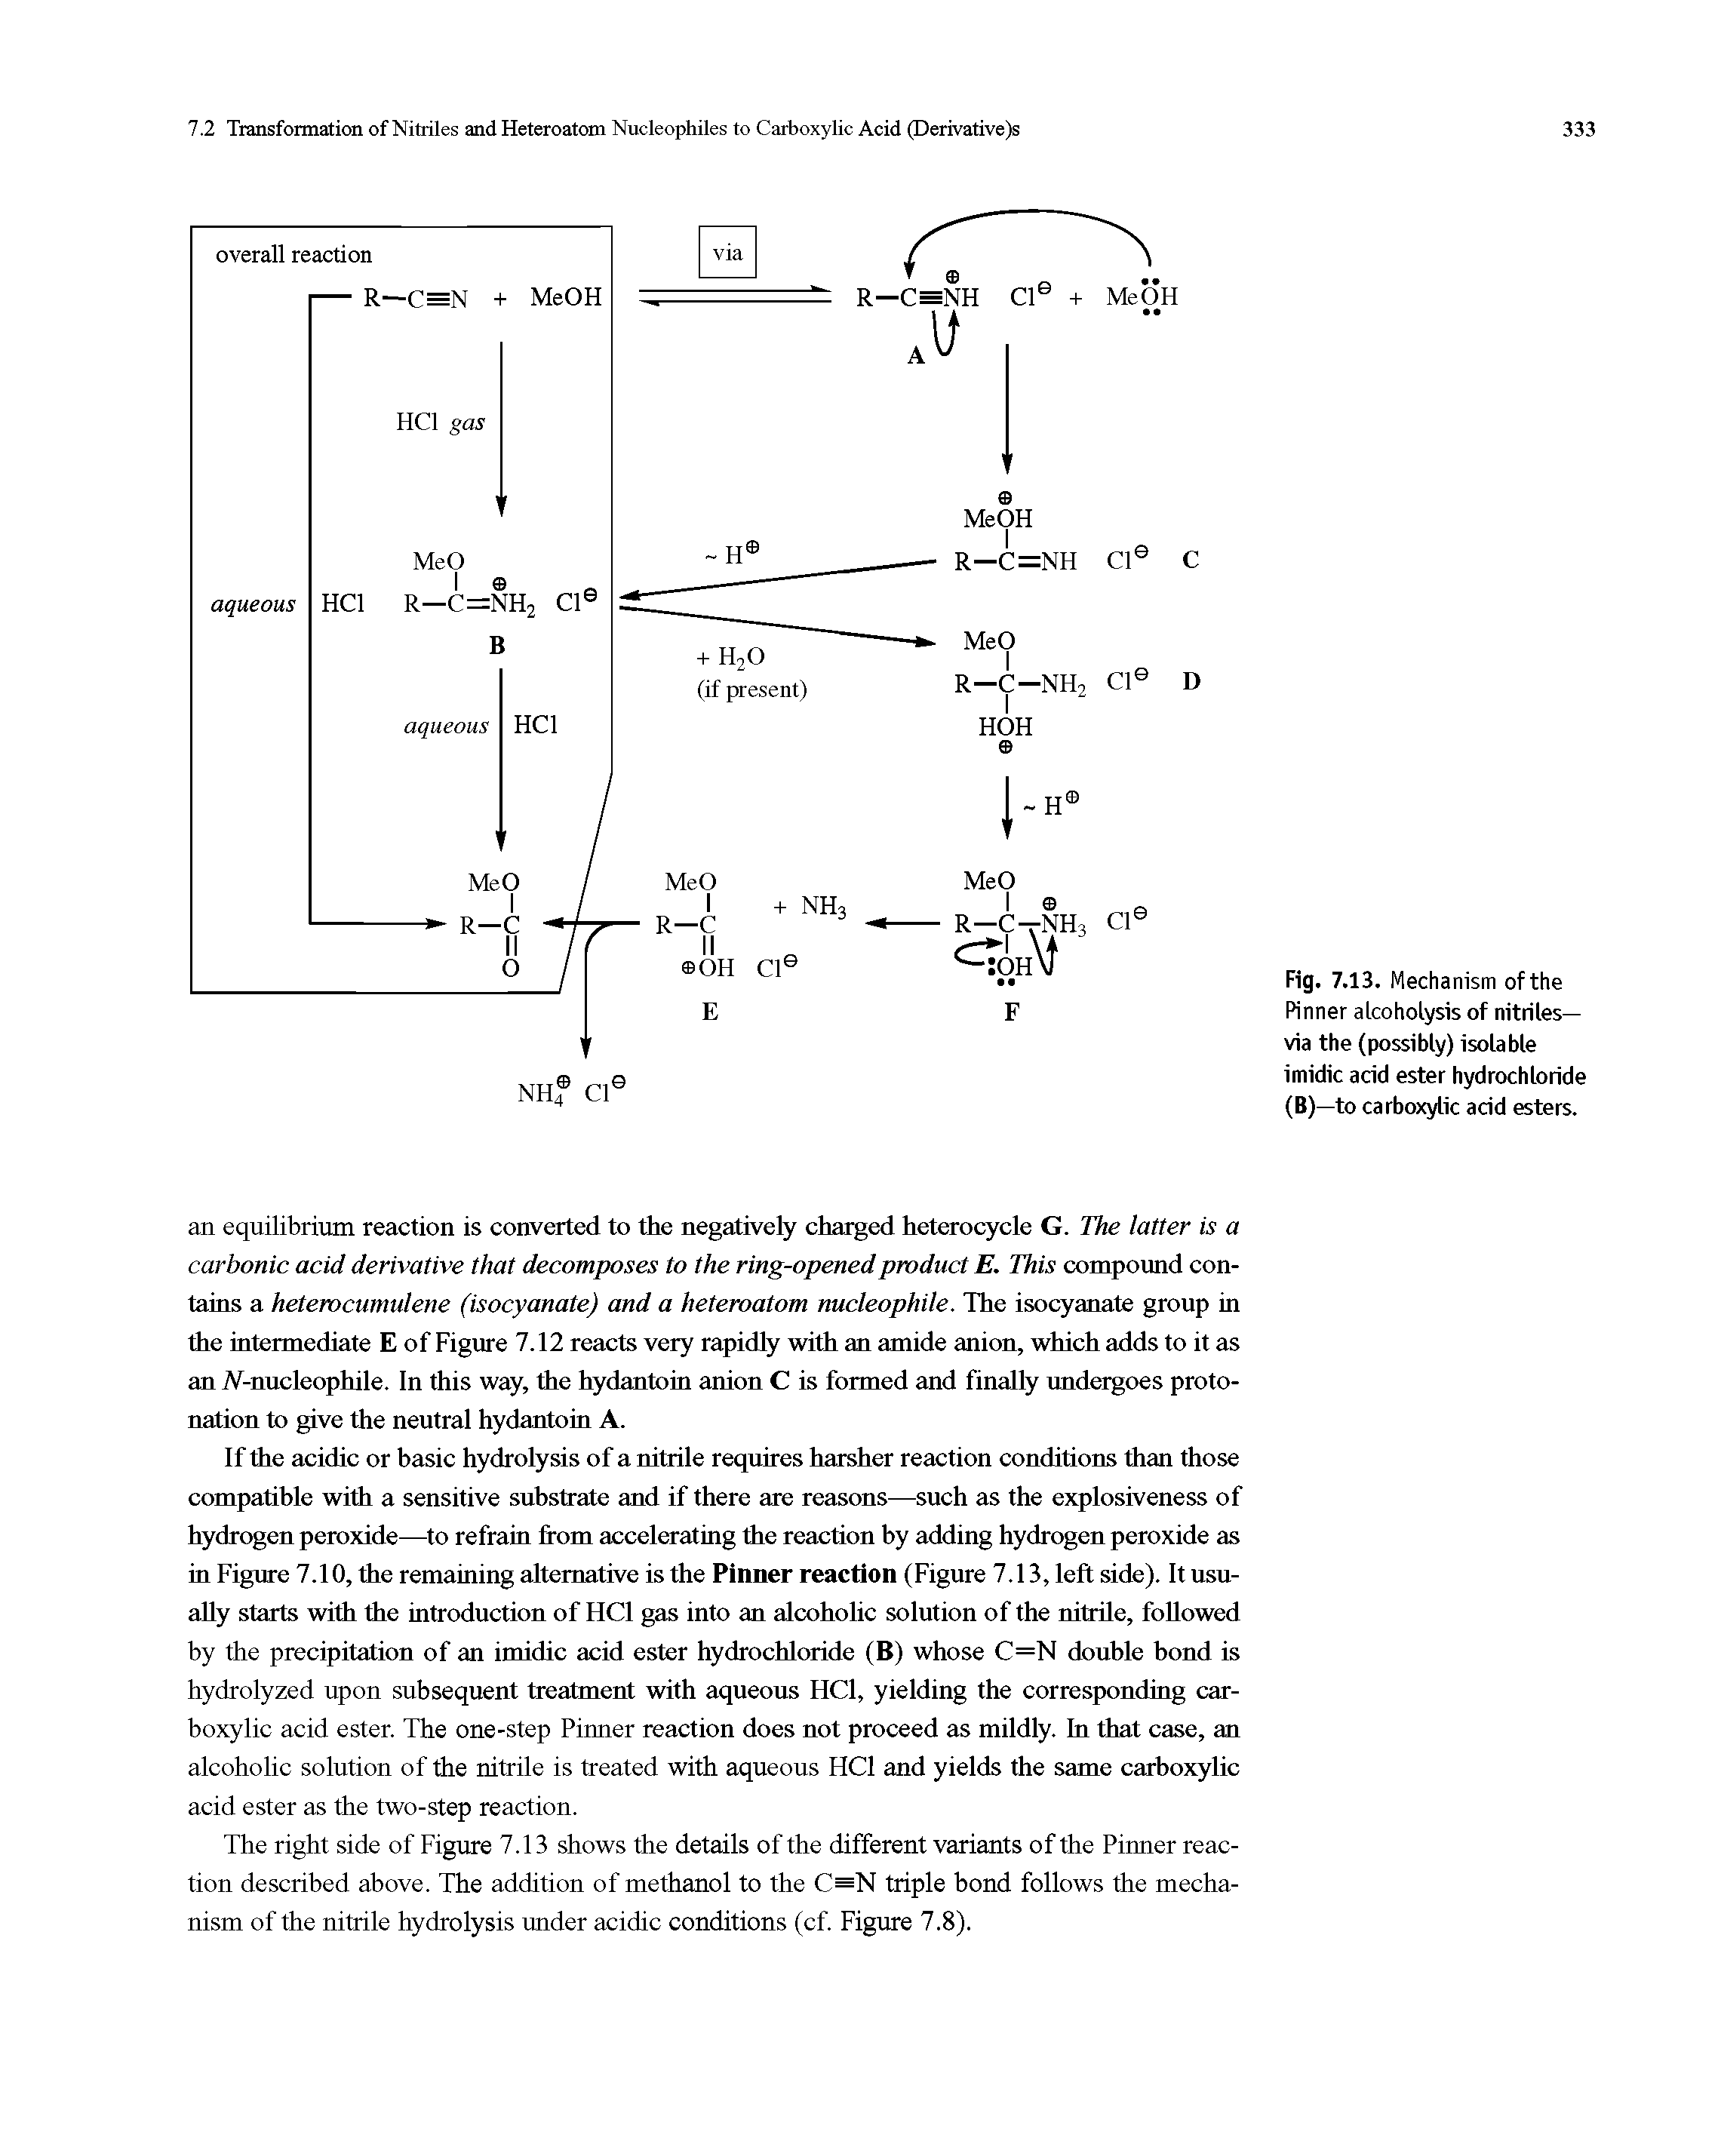 Fig. 7.13. Mechanism of the Pinner alcoholysis of nitriles— via the (possibly) isolable imidic acid ester hydrochloride (B)—to carboxylic acid esters.